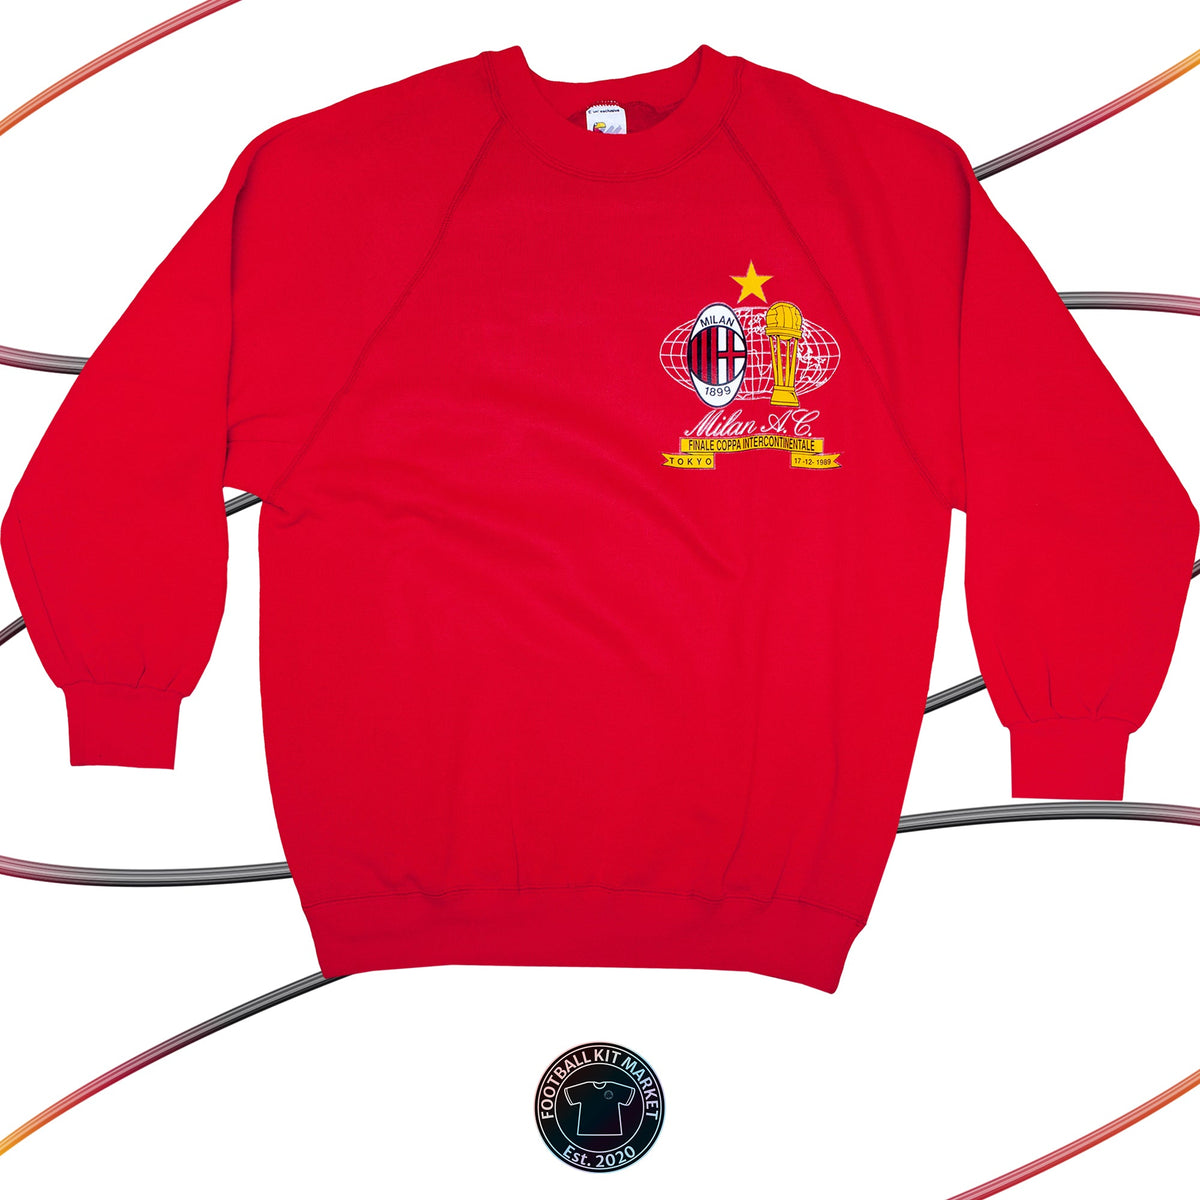 Genuine AC MILAN Jumper (1989) - Made by BASIC (L) - Product Image from Football Kit Market